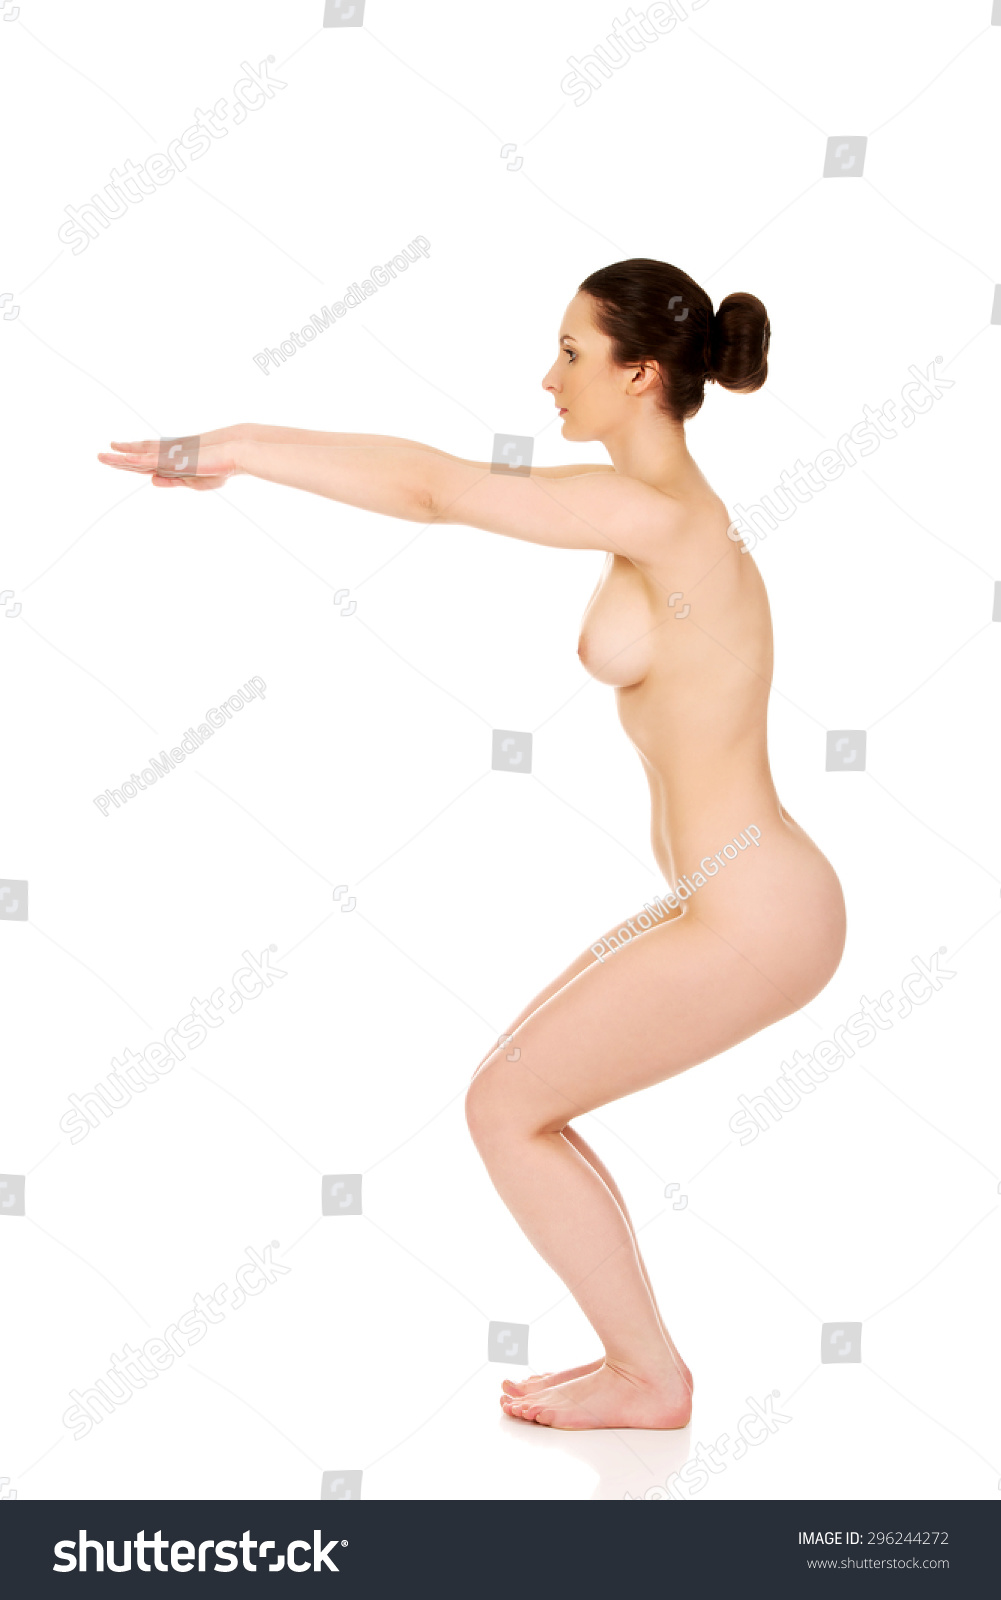 Nude Woman Exercising 110